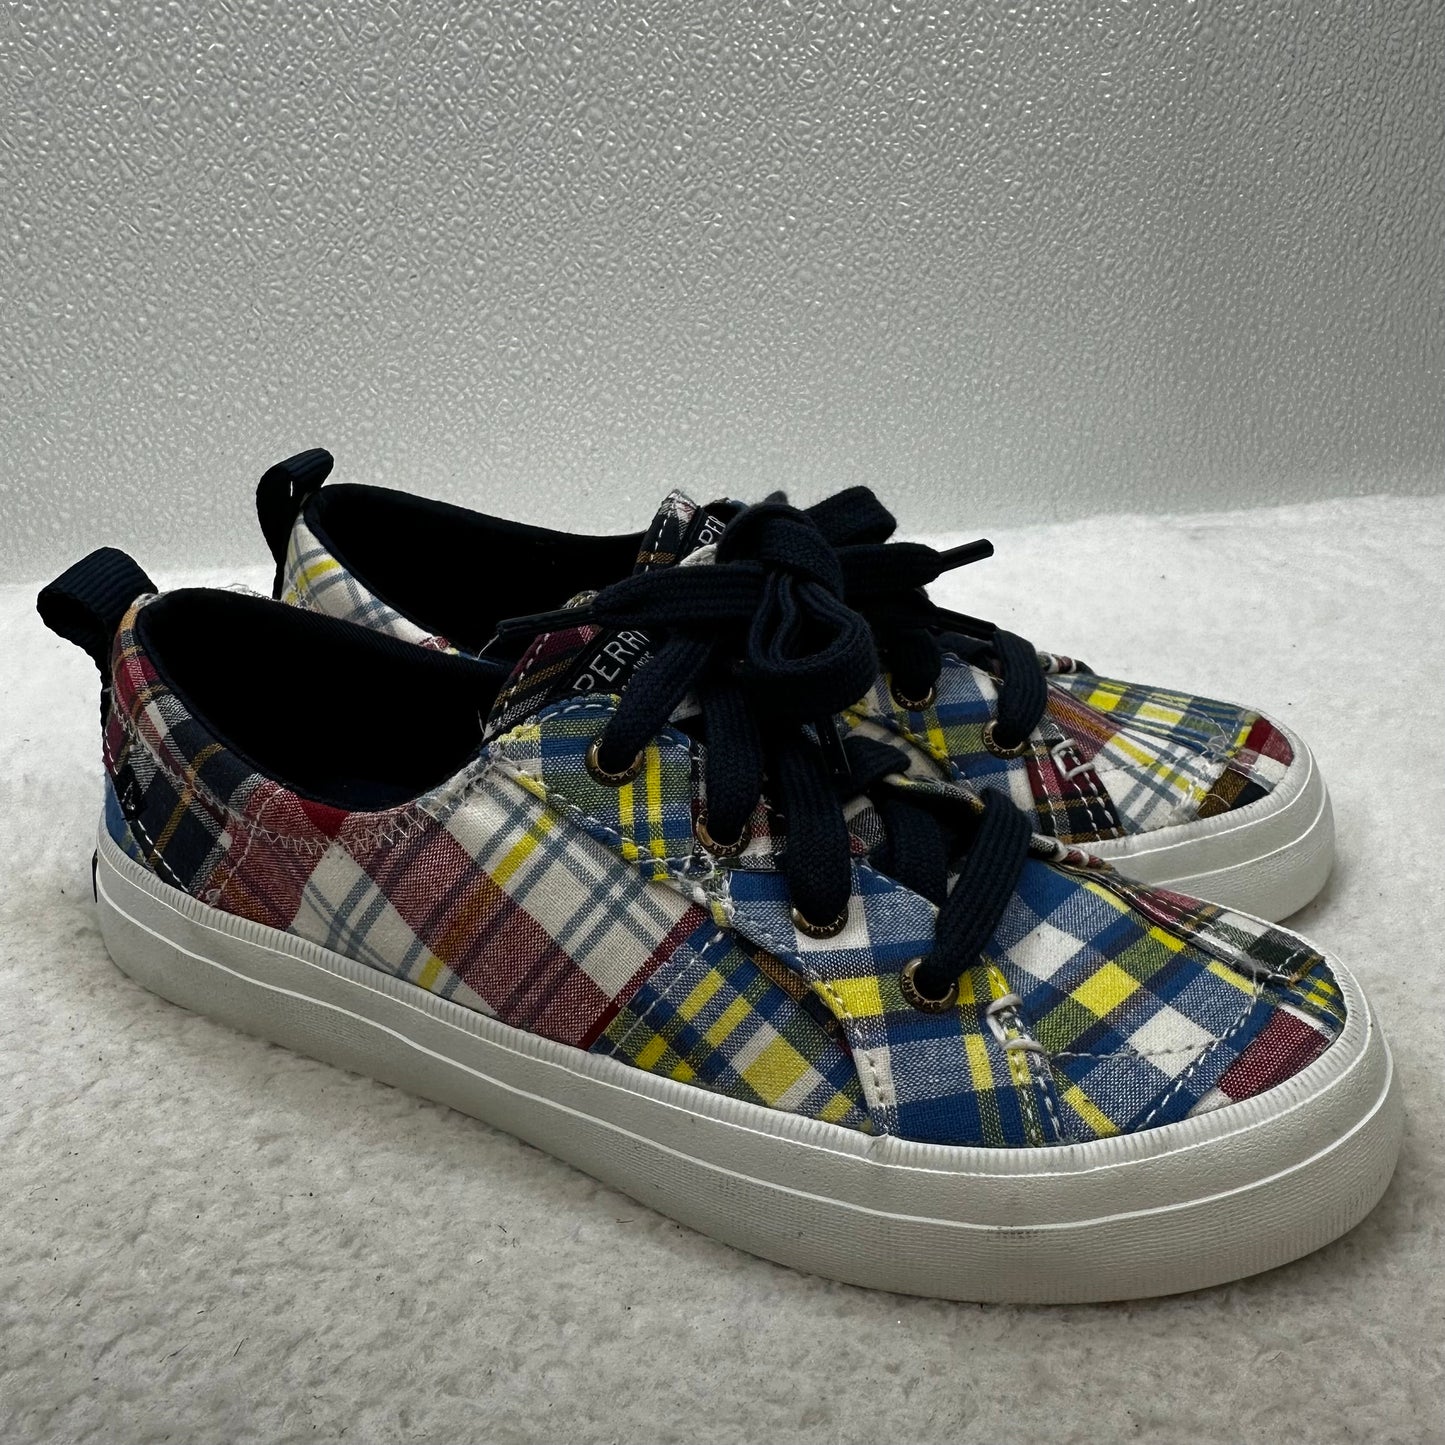 Plaid Shoes Sneakers Sperry, Size 6